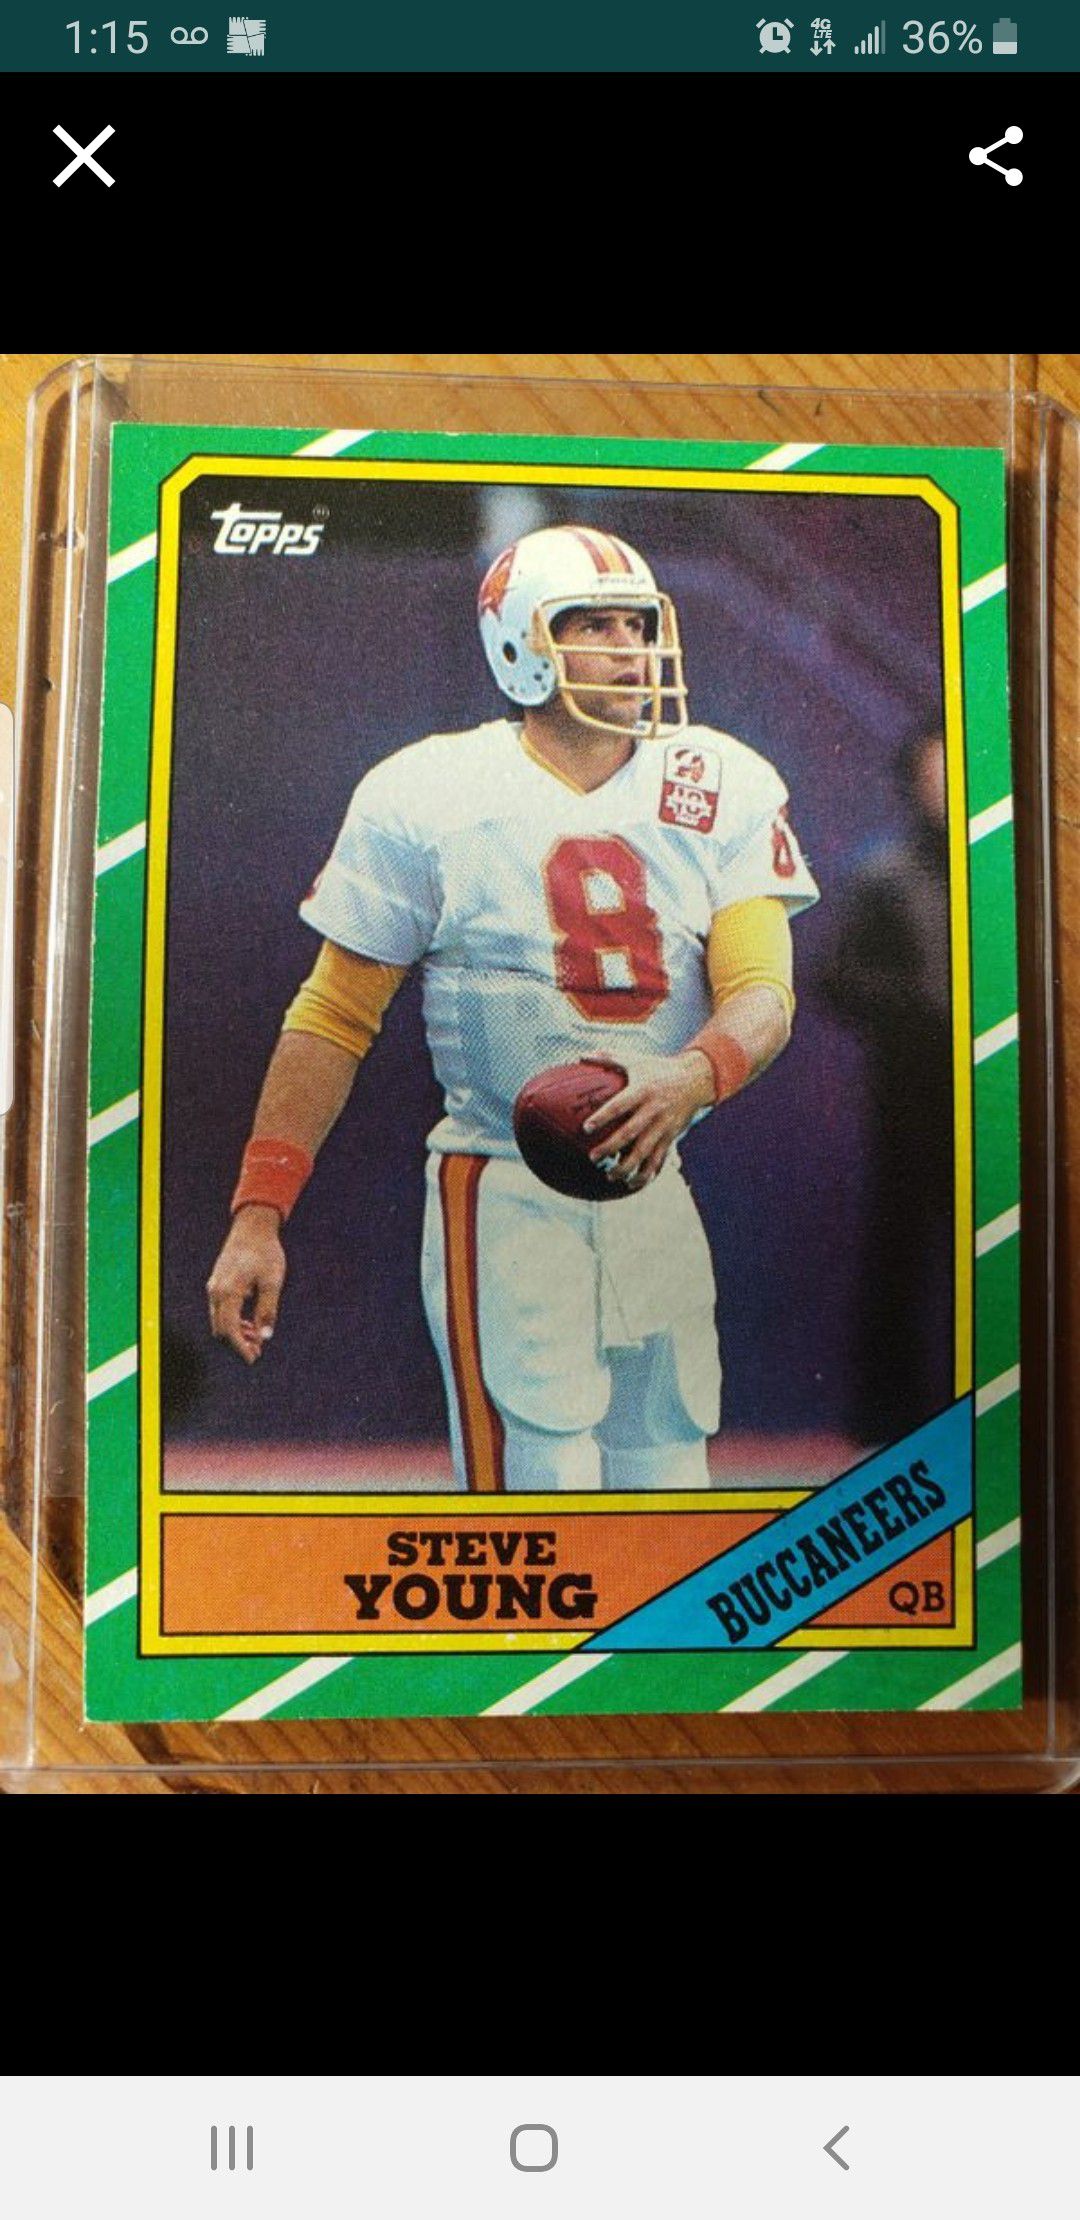 1986 Topps Steve young Rookie card $10 EACH +3 to Ship. (5 are left. )